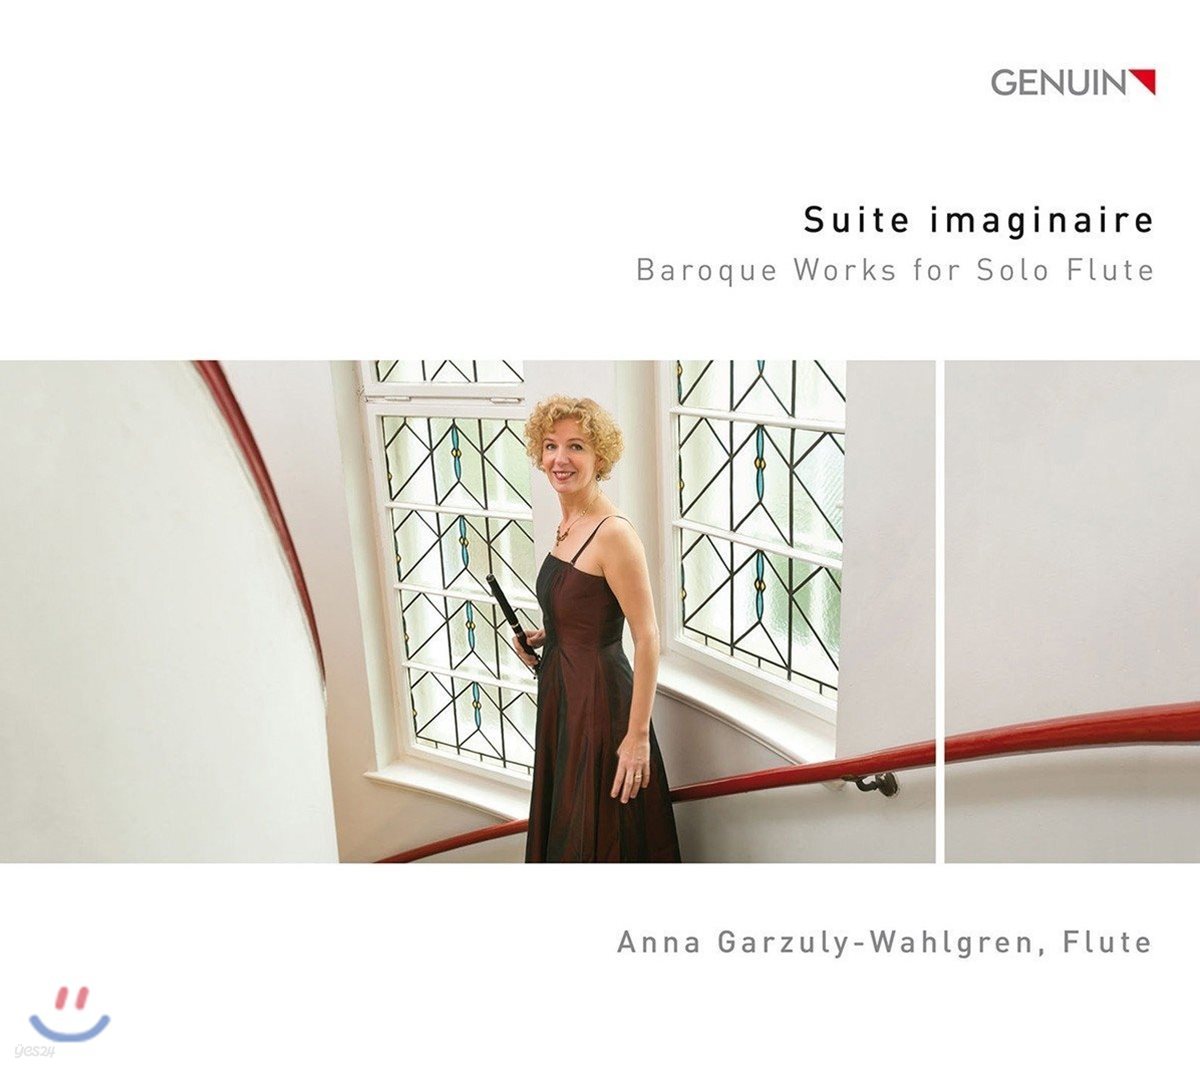 Anna Garzuly-Wahlgren 바로크 플루트 독주 작품집 (Suite imaginaire - Baroque Works for Solo Flute)